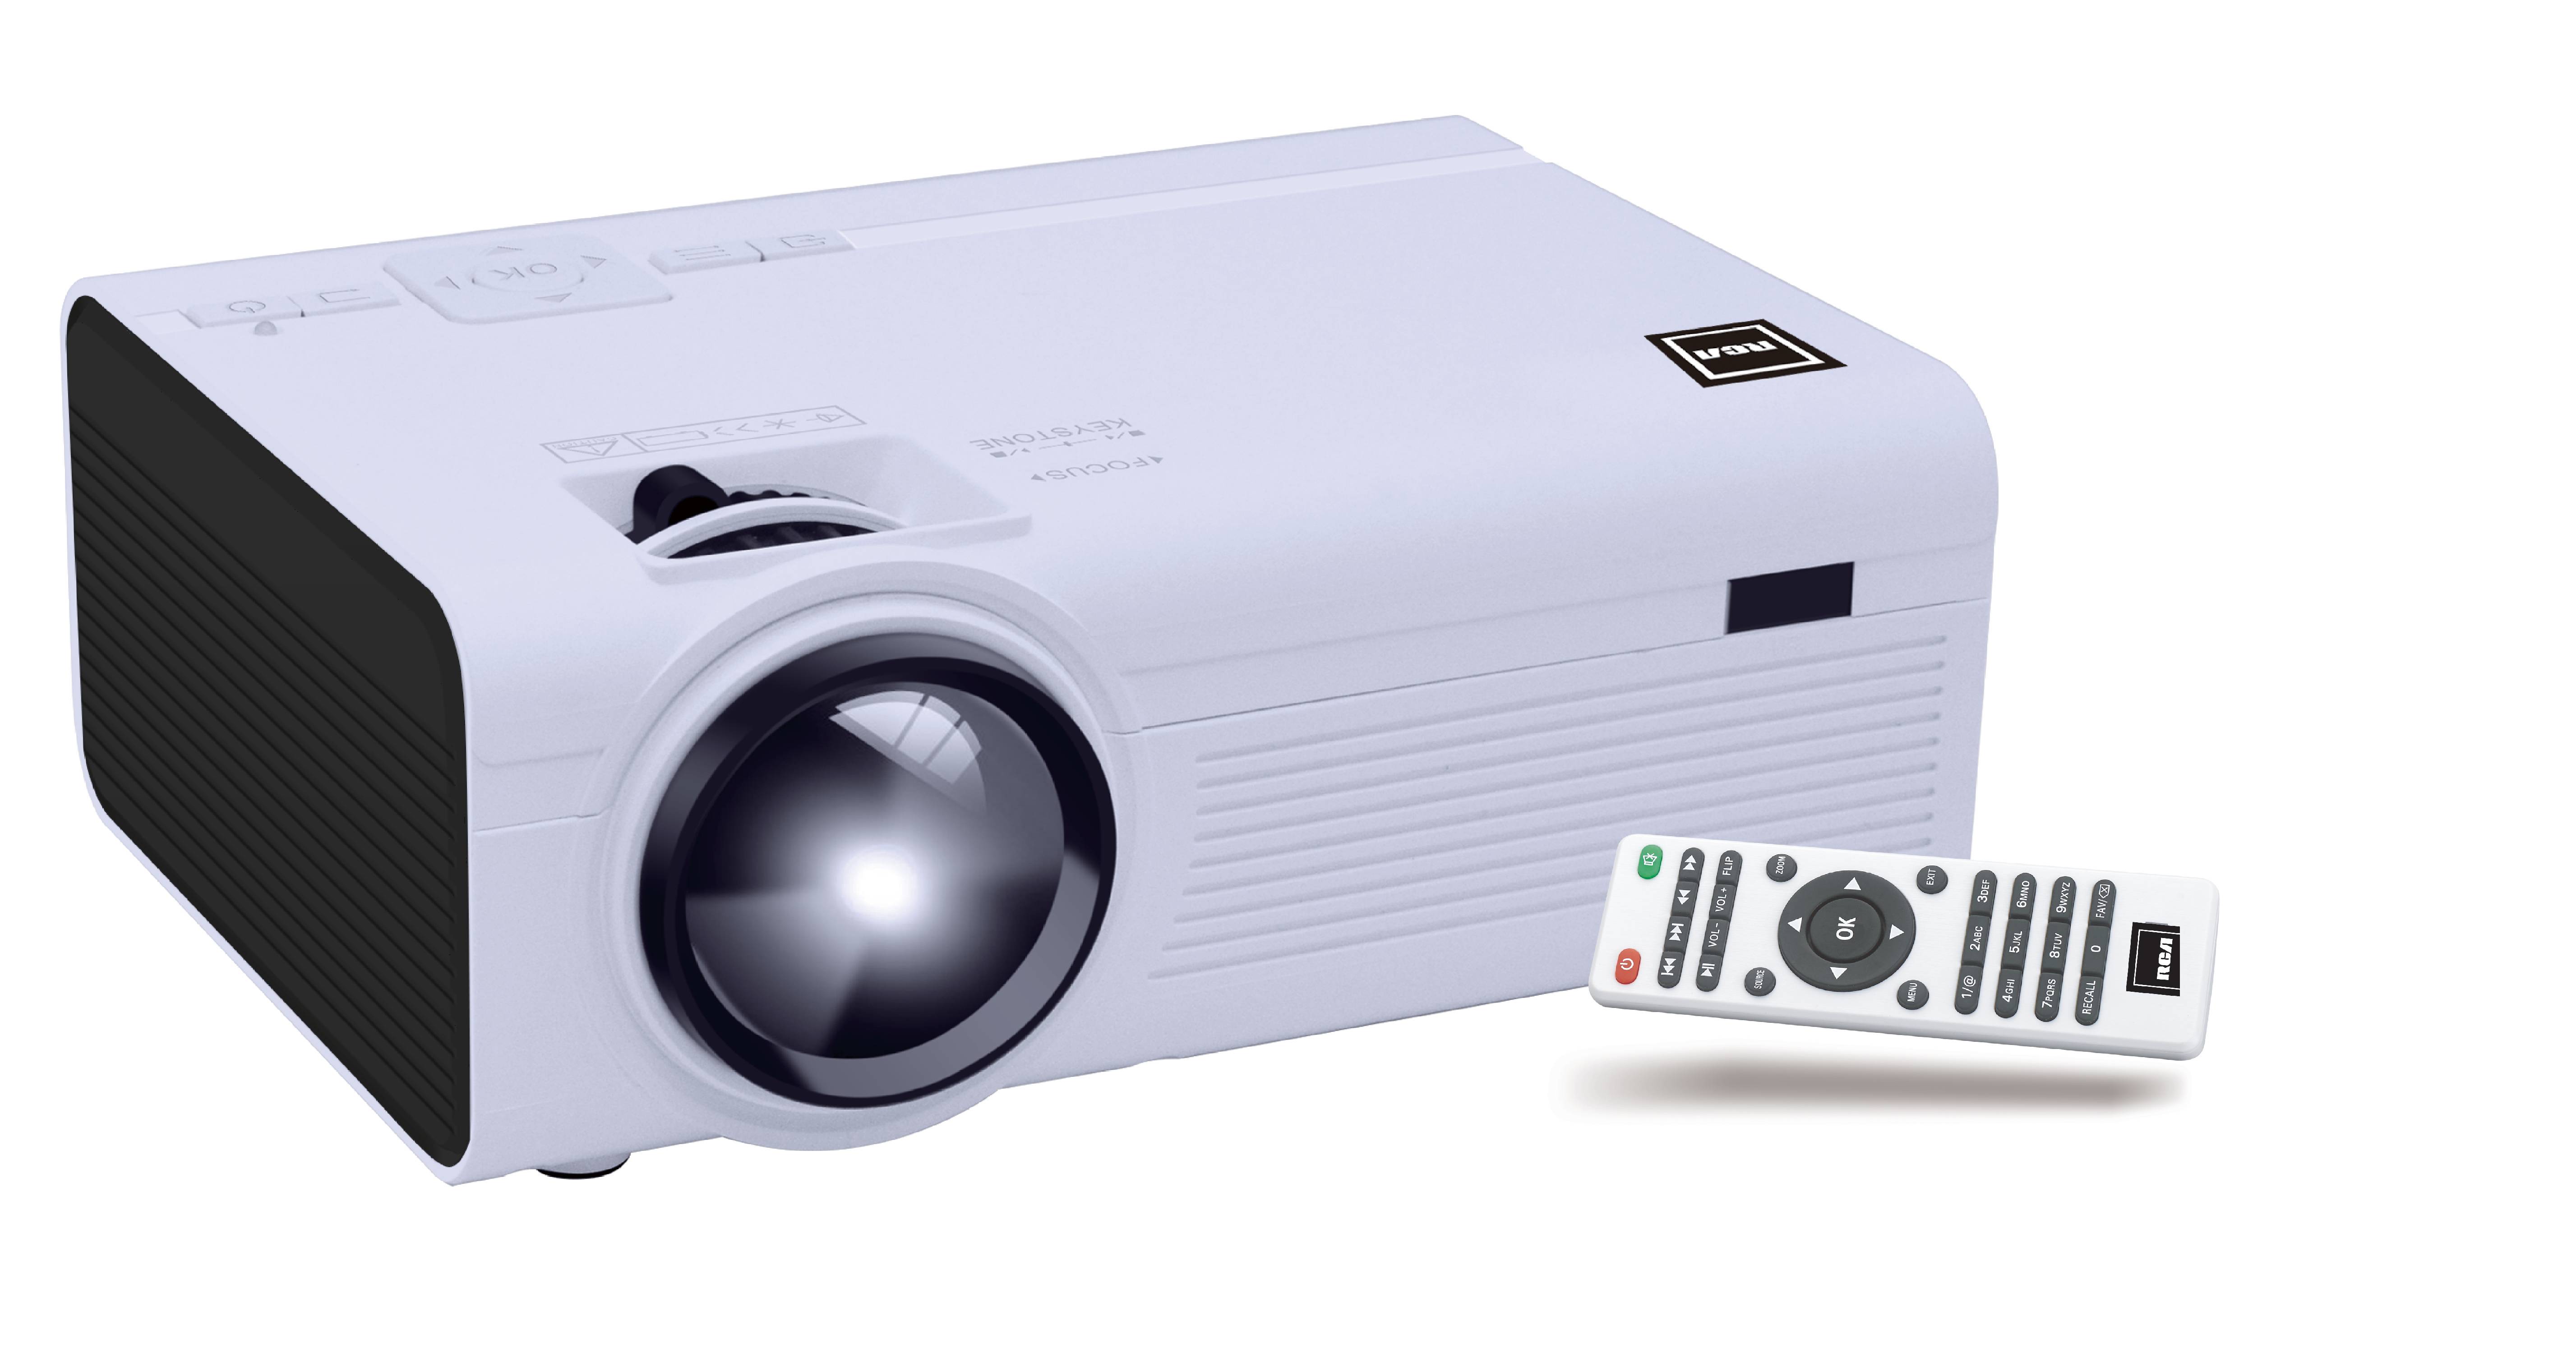 RCA RPJ119 Home Theater Projector - up to 150 Lumens 1080p Playback - image 1 of 7